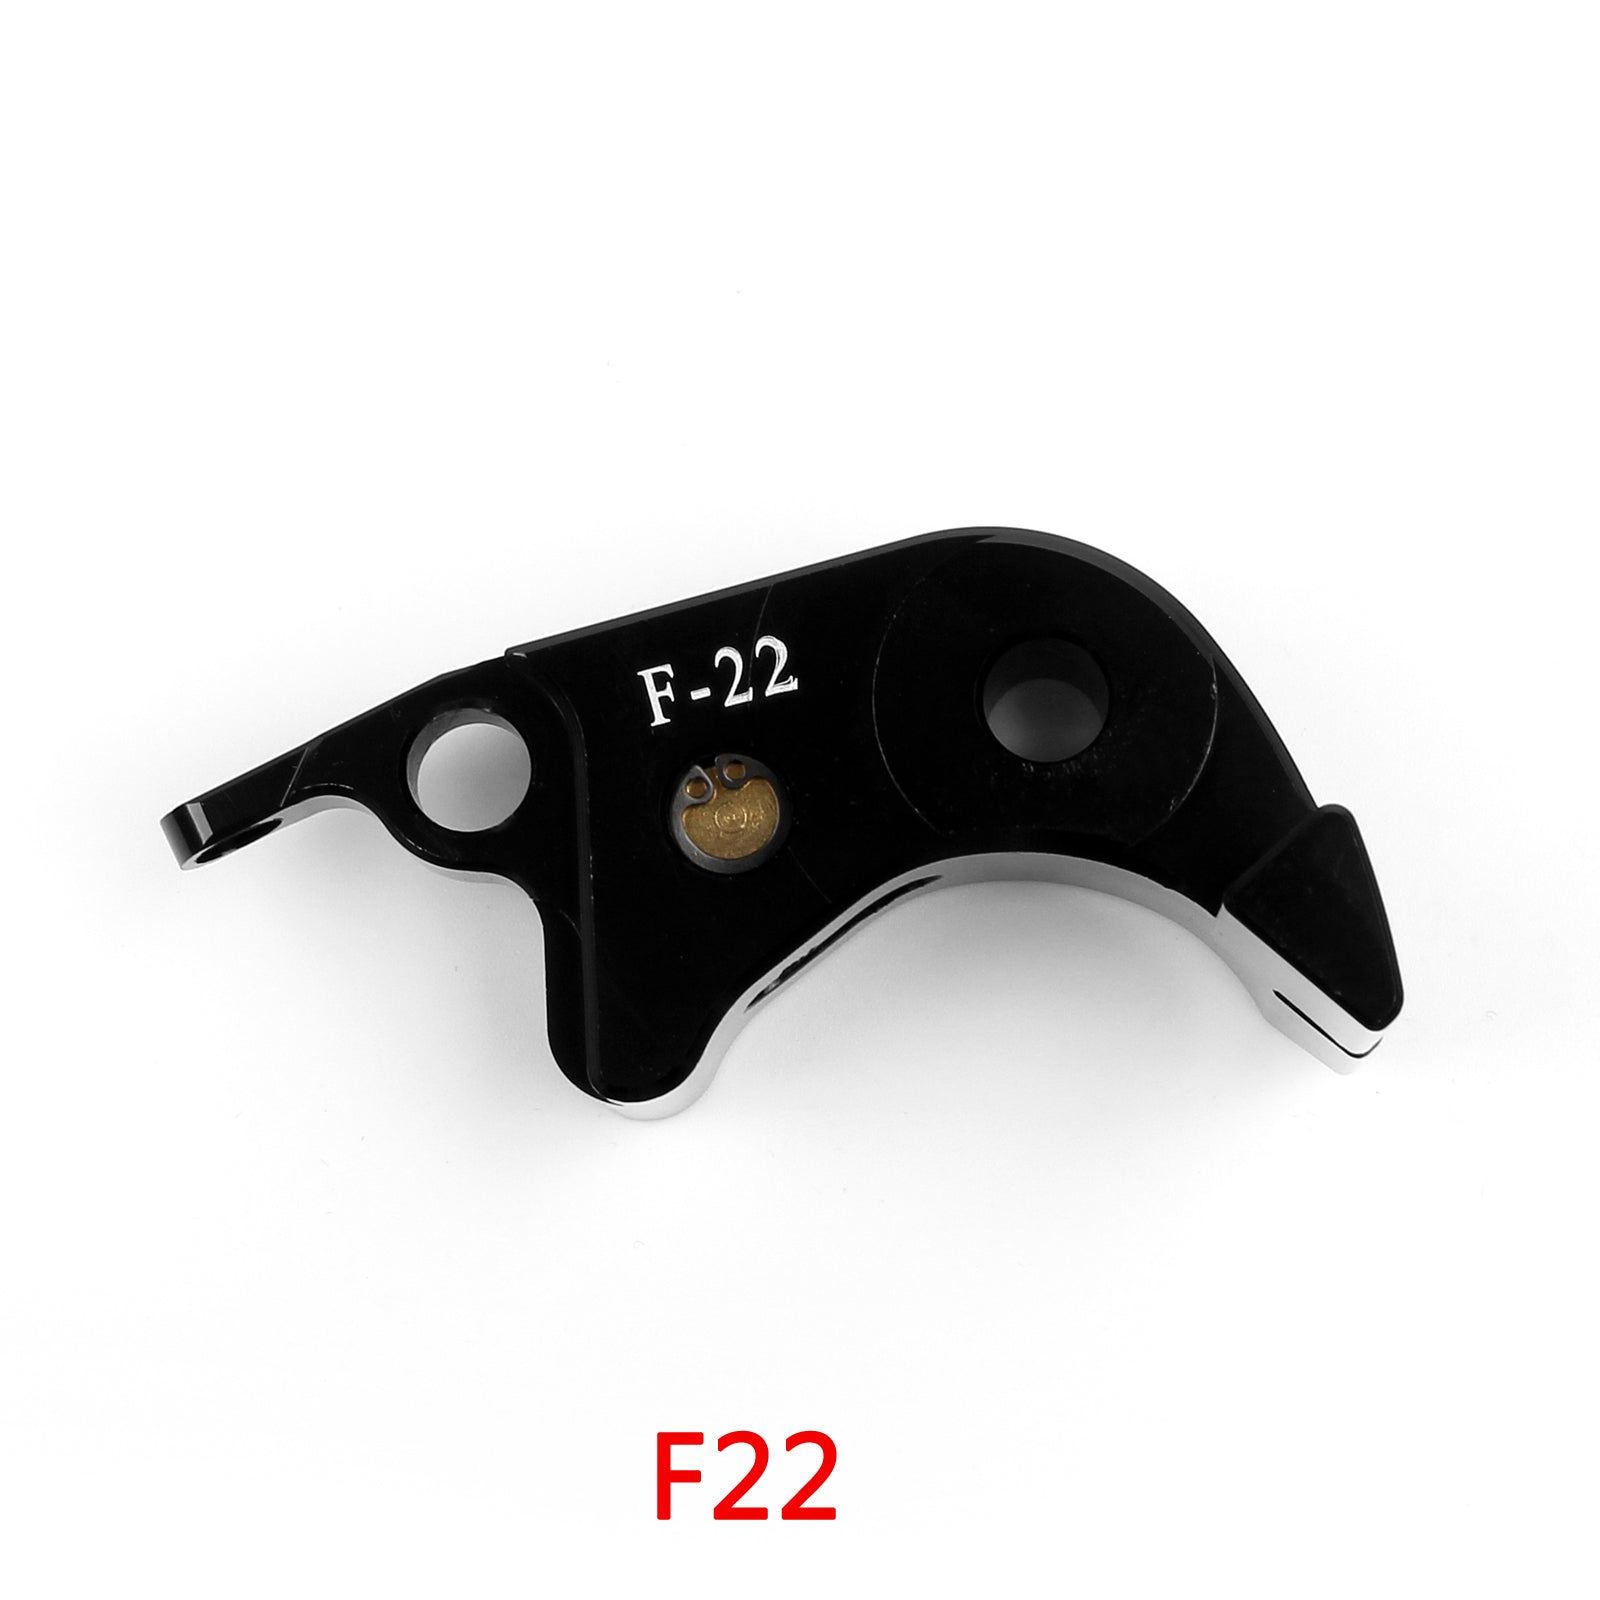 NEW Short Clutch Brake Lever fit for BMW S1000R S1000RR 2015-2018